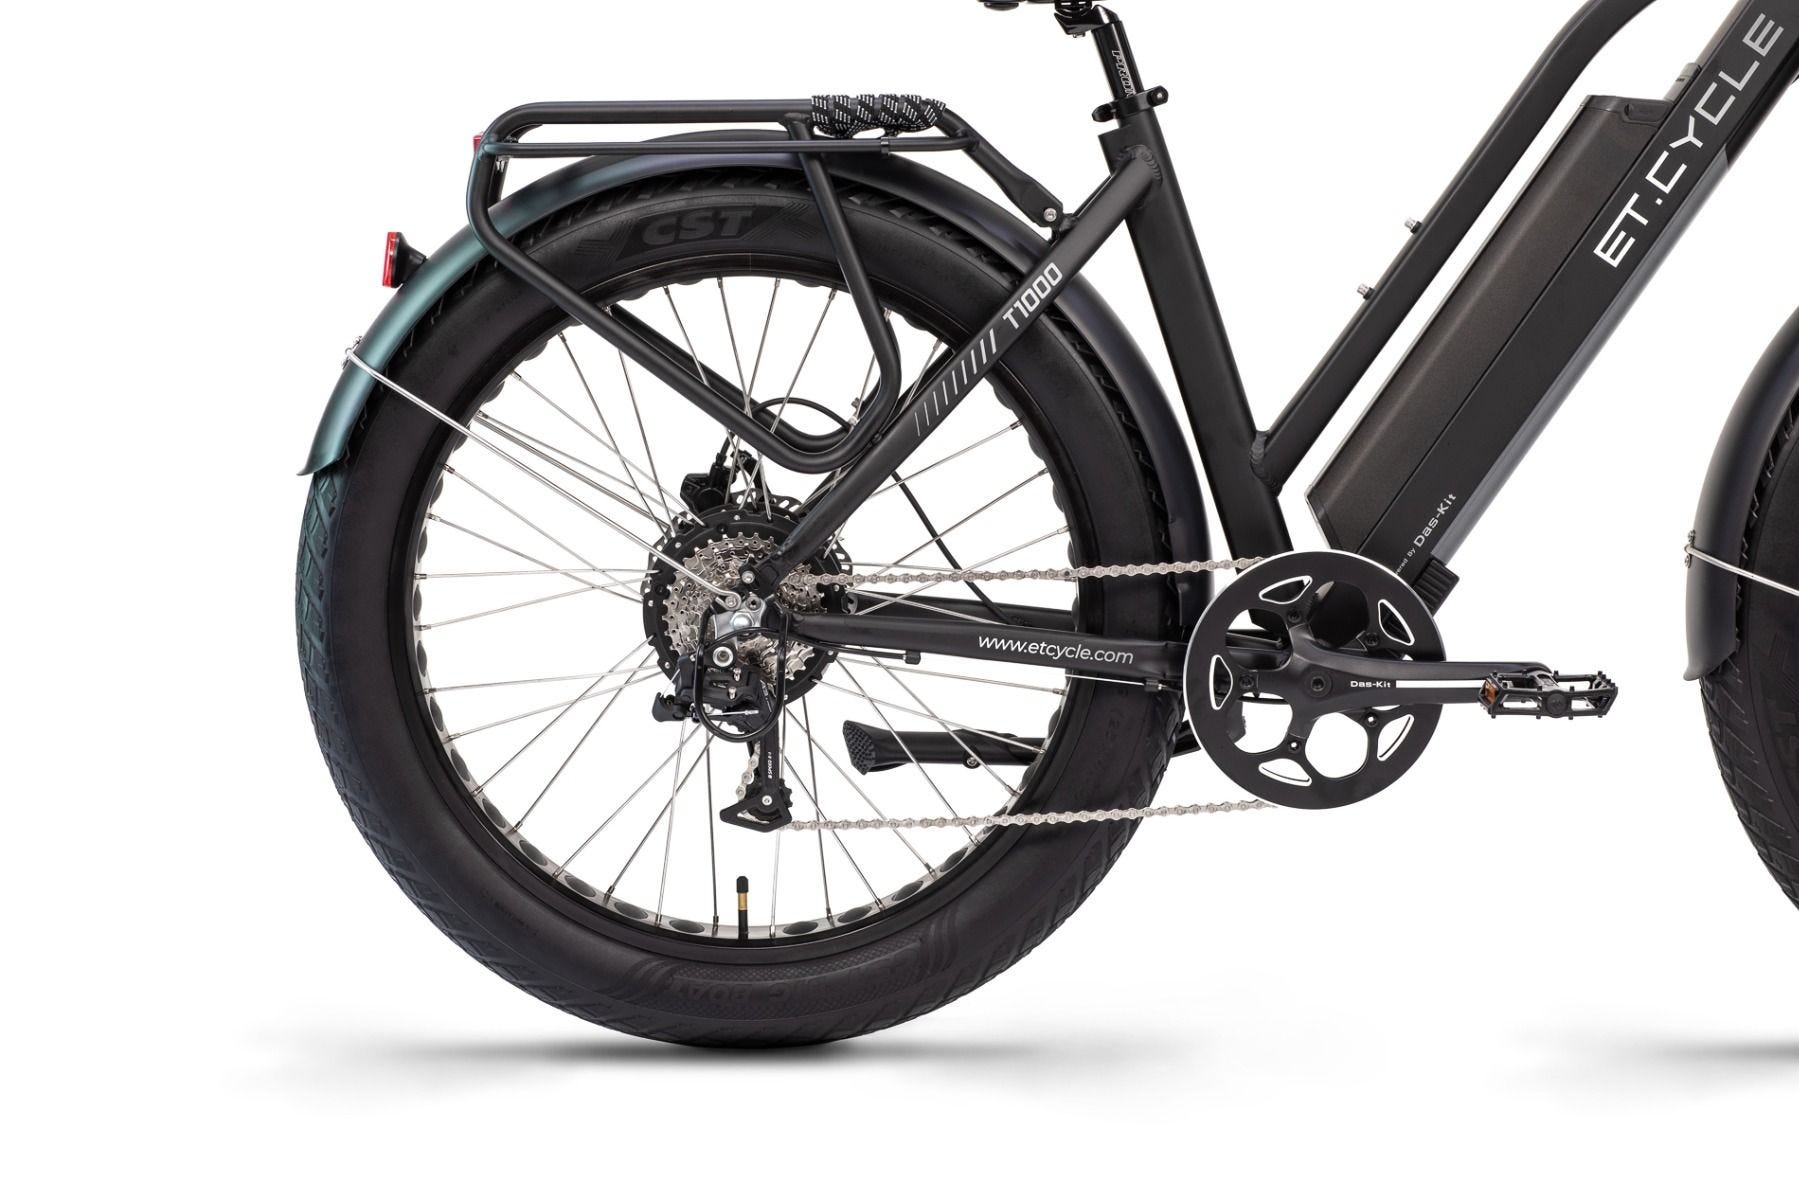 ET Cycle T1000 Electric Fat Tire Bike